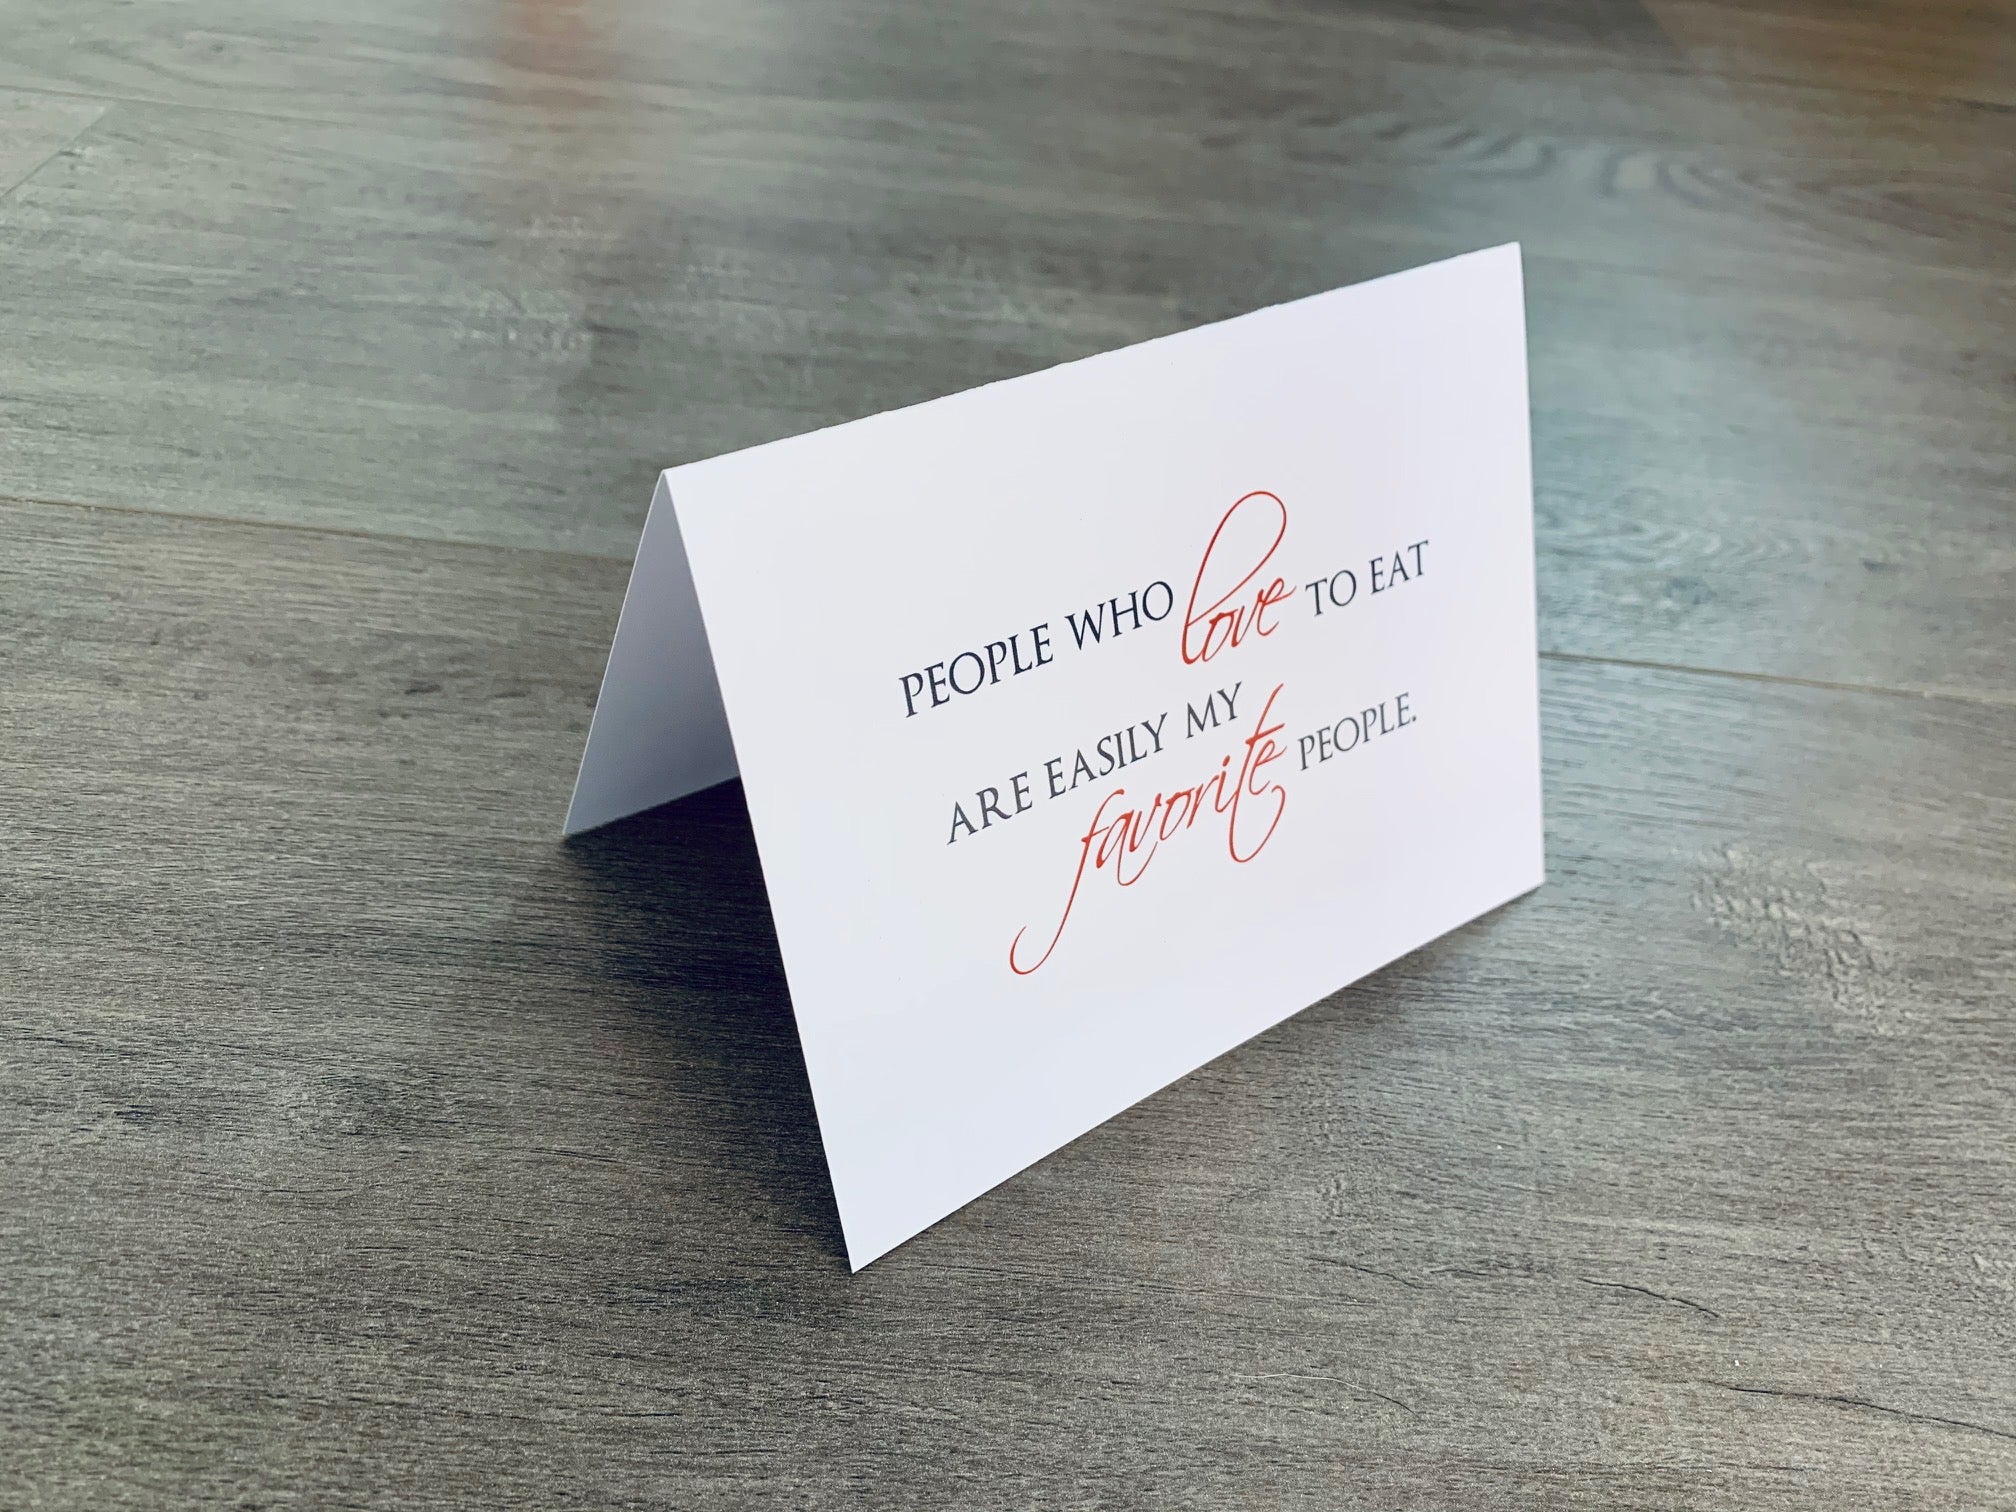 A white, folded notecard sits on a wooden floor. The card says, "People who love to eat are easily my favorite people." The Foodie collection by Stationare.